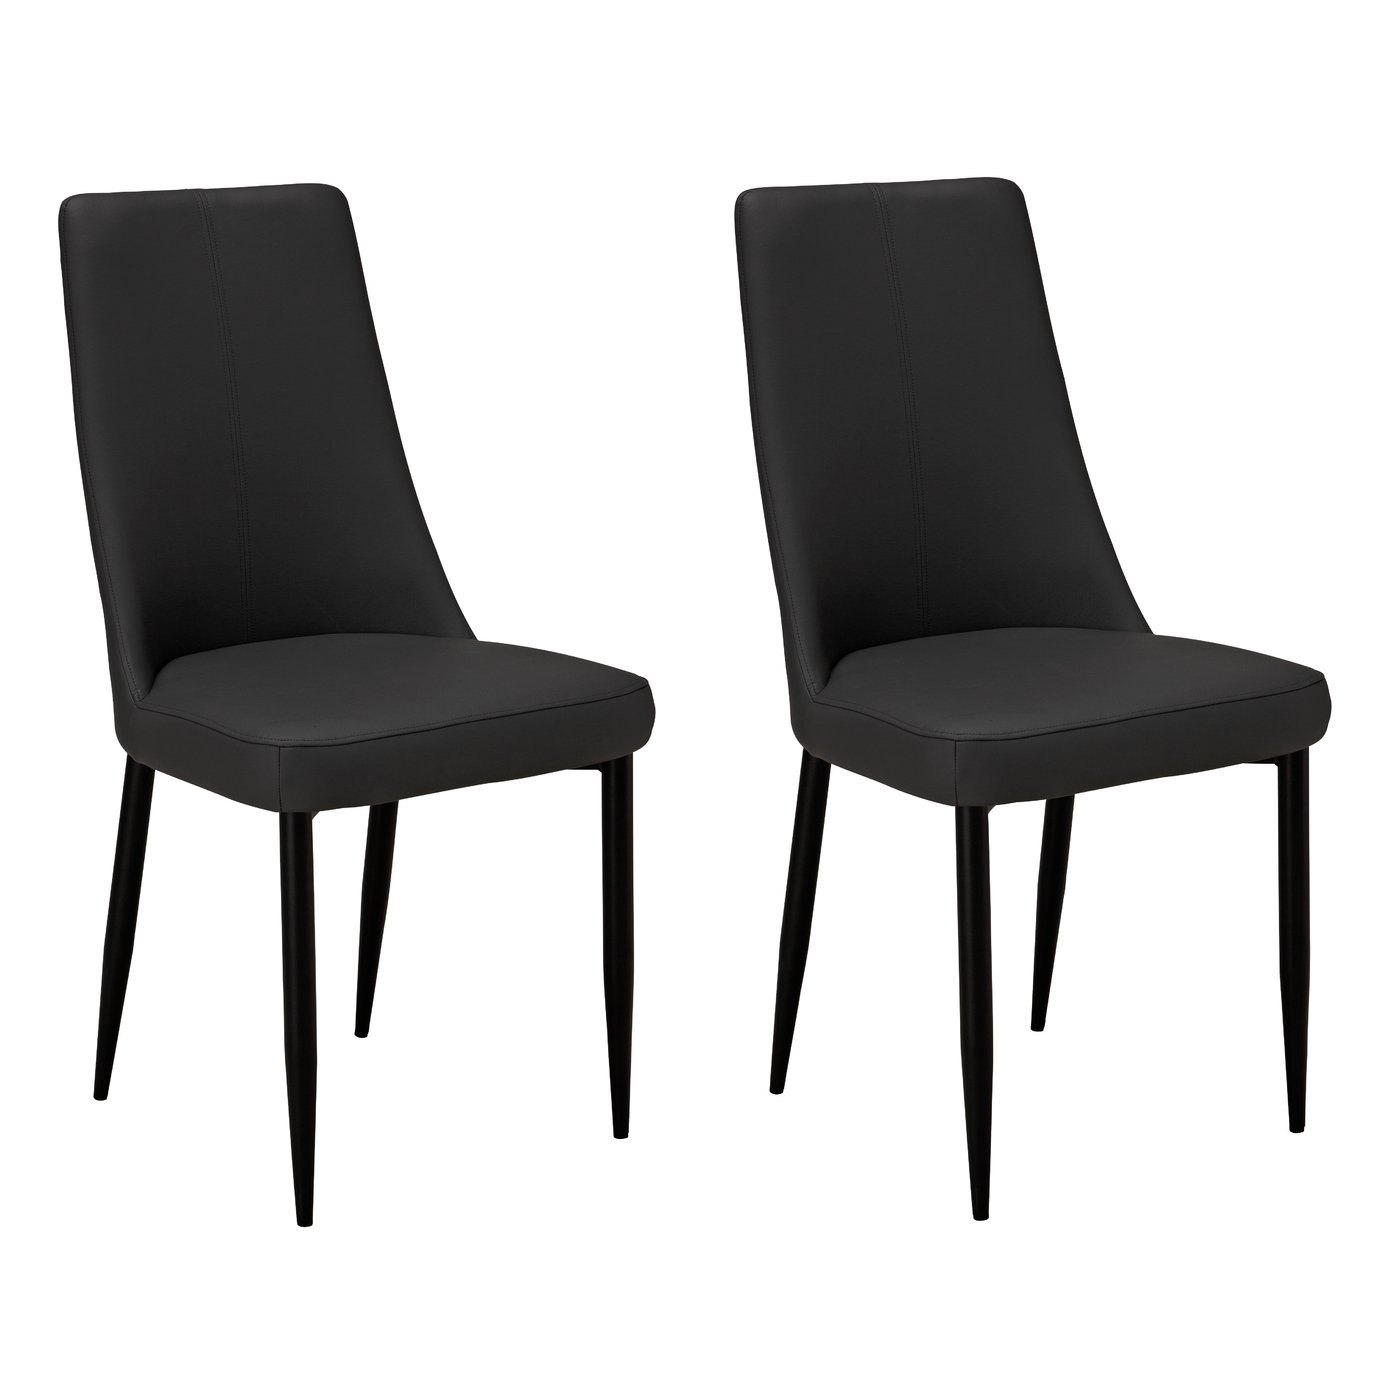 Argos Home Isla Pair of Faux Leather Dining Chairs -Charcoal